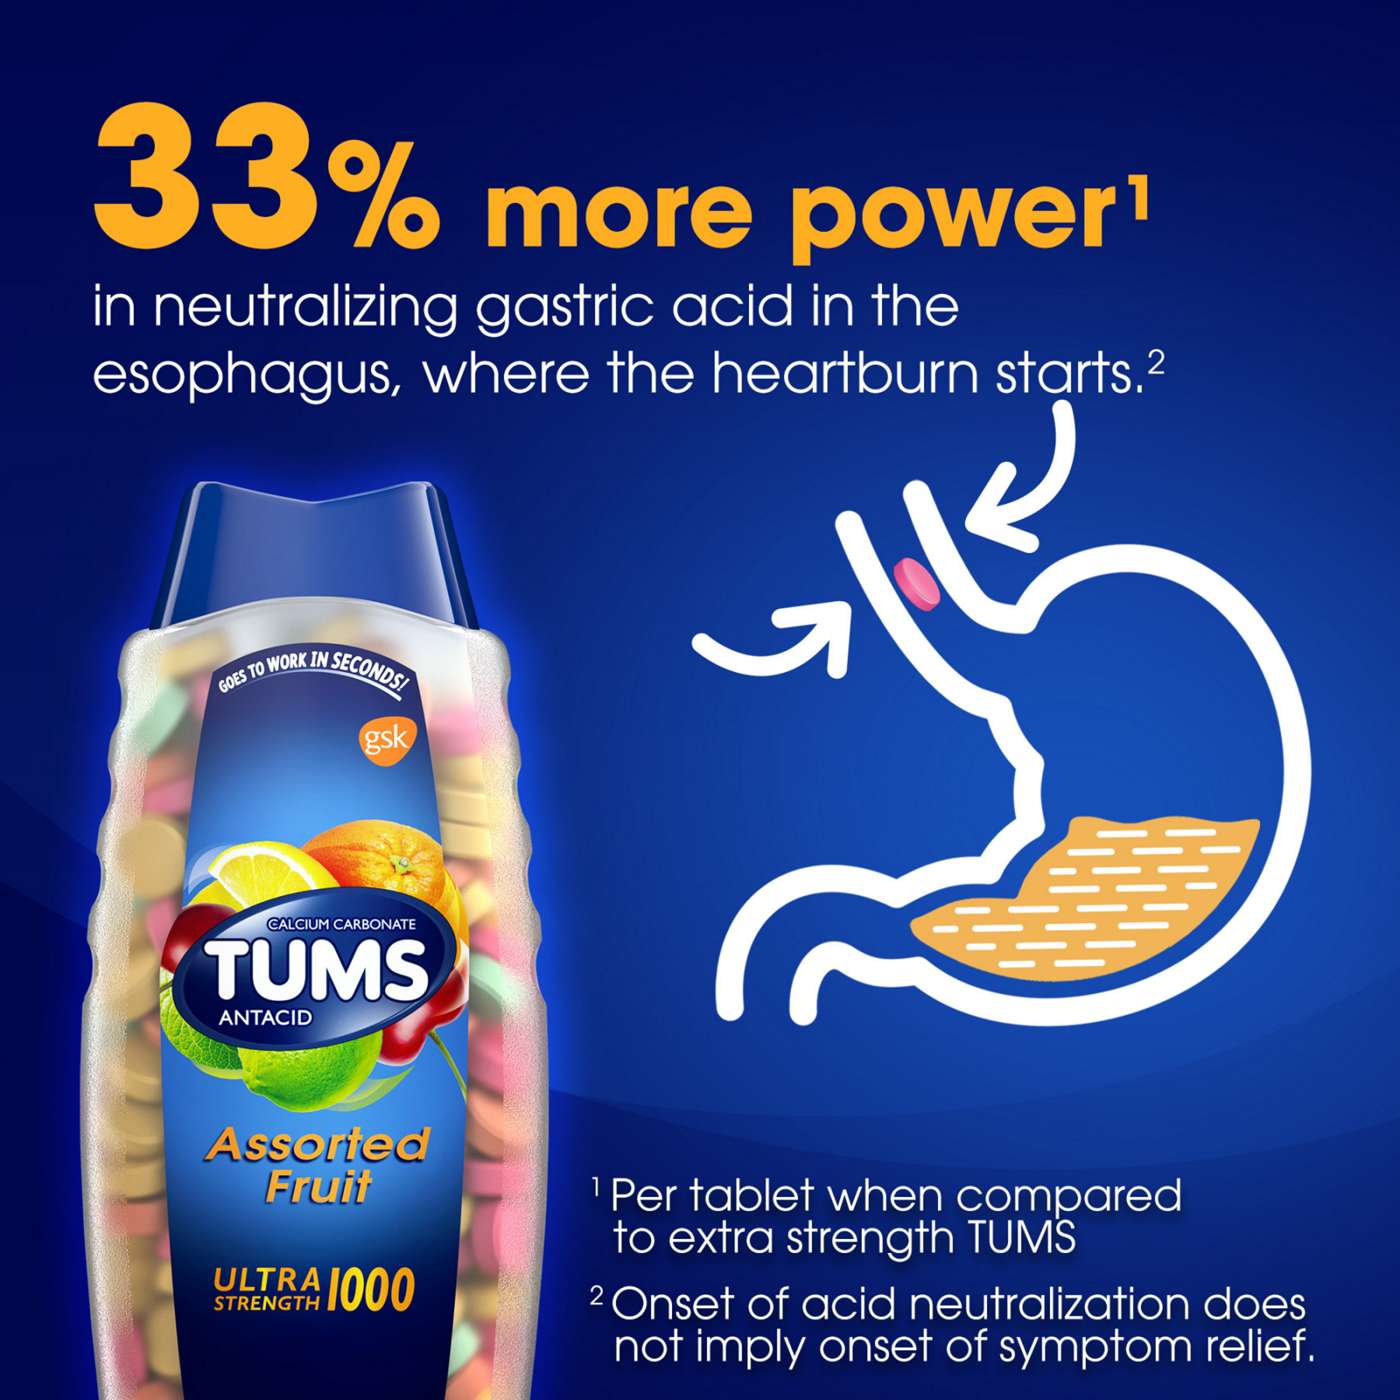 Tums Ultra Strength Antacid Tablets; image 8 of 8